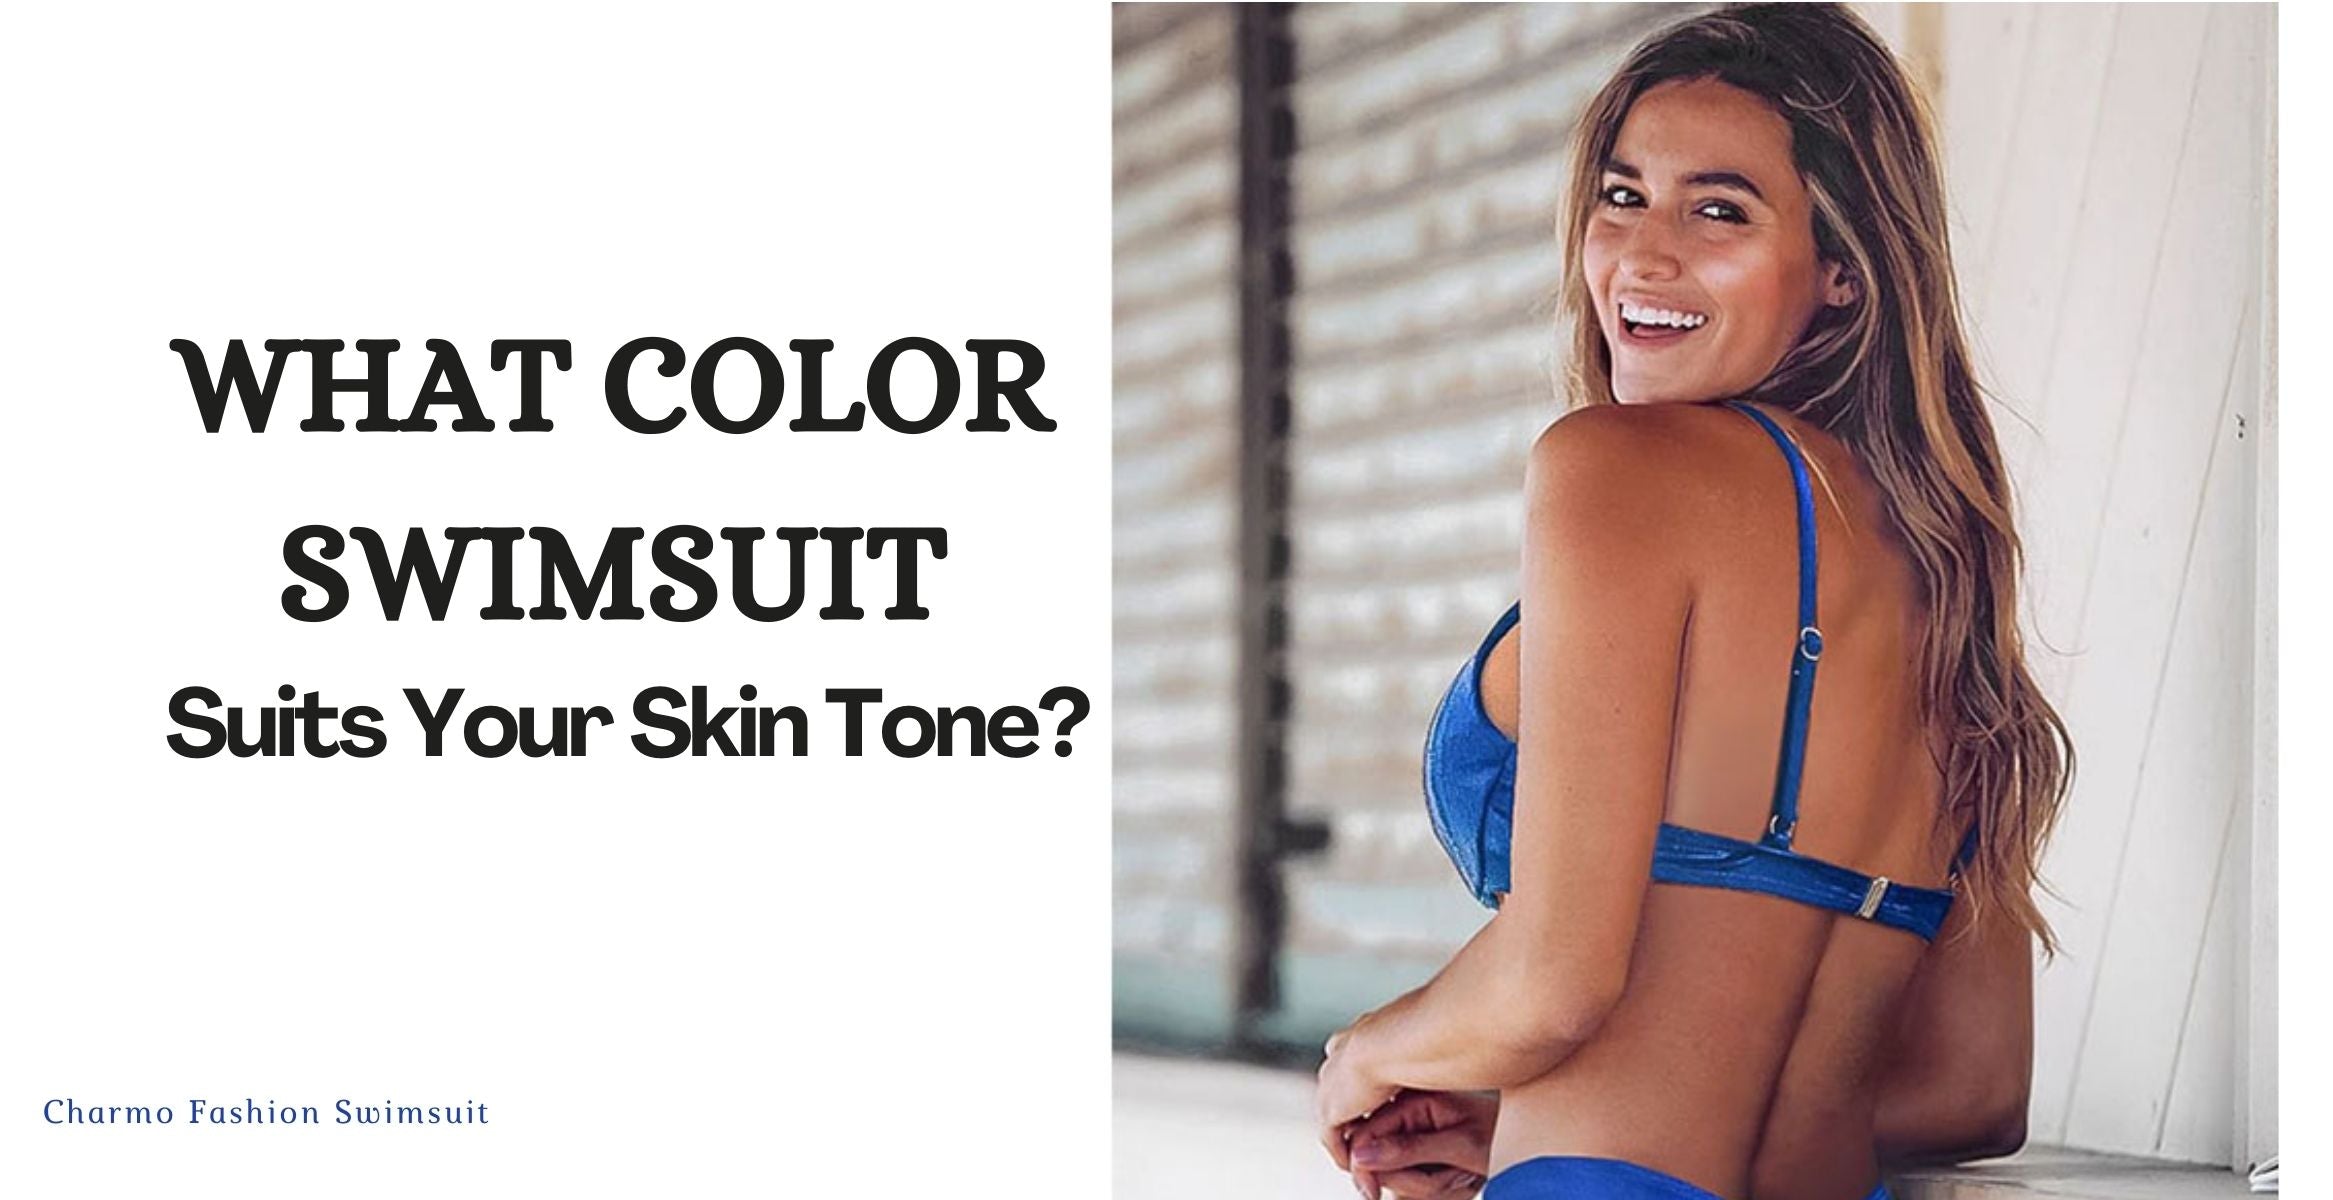 What Color Swimsuit Suits Your Skin Tone?